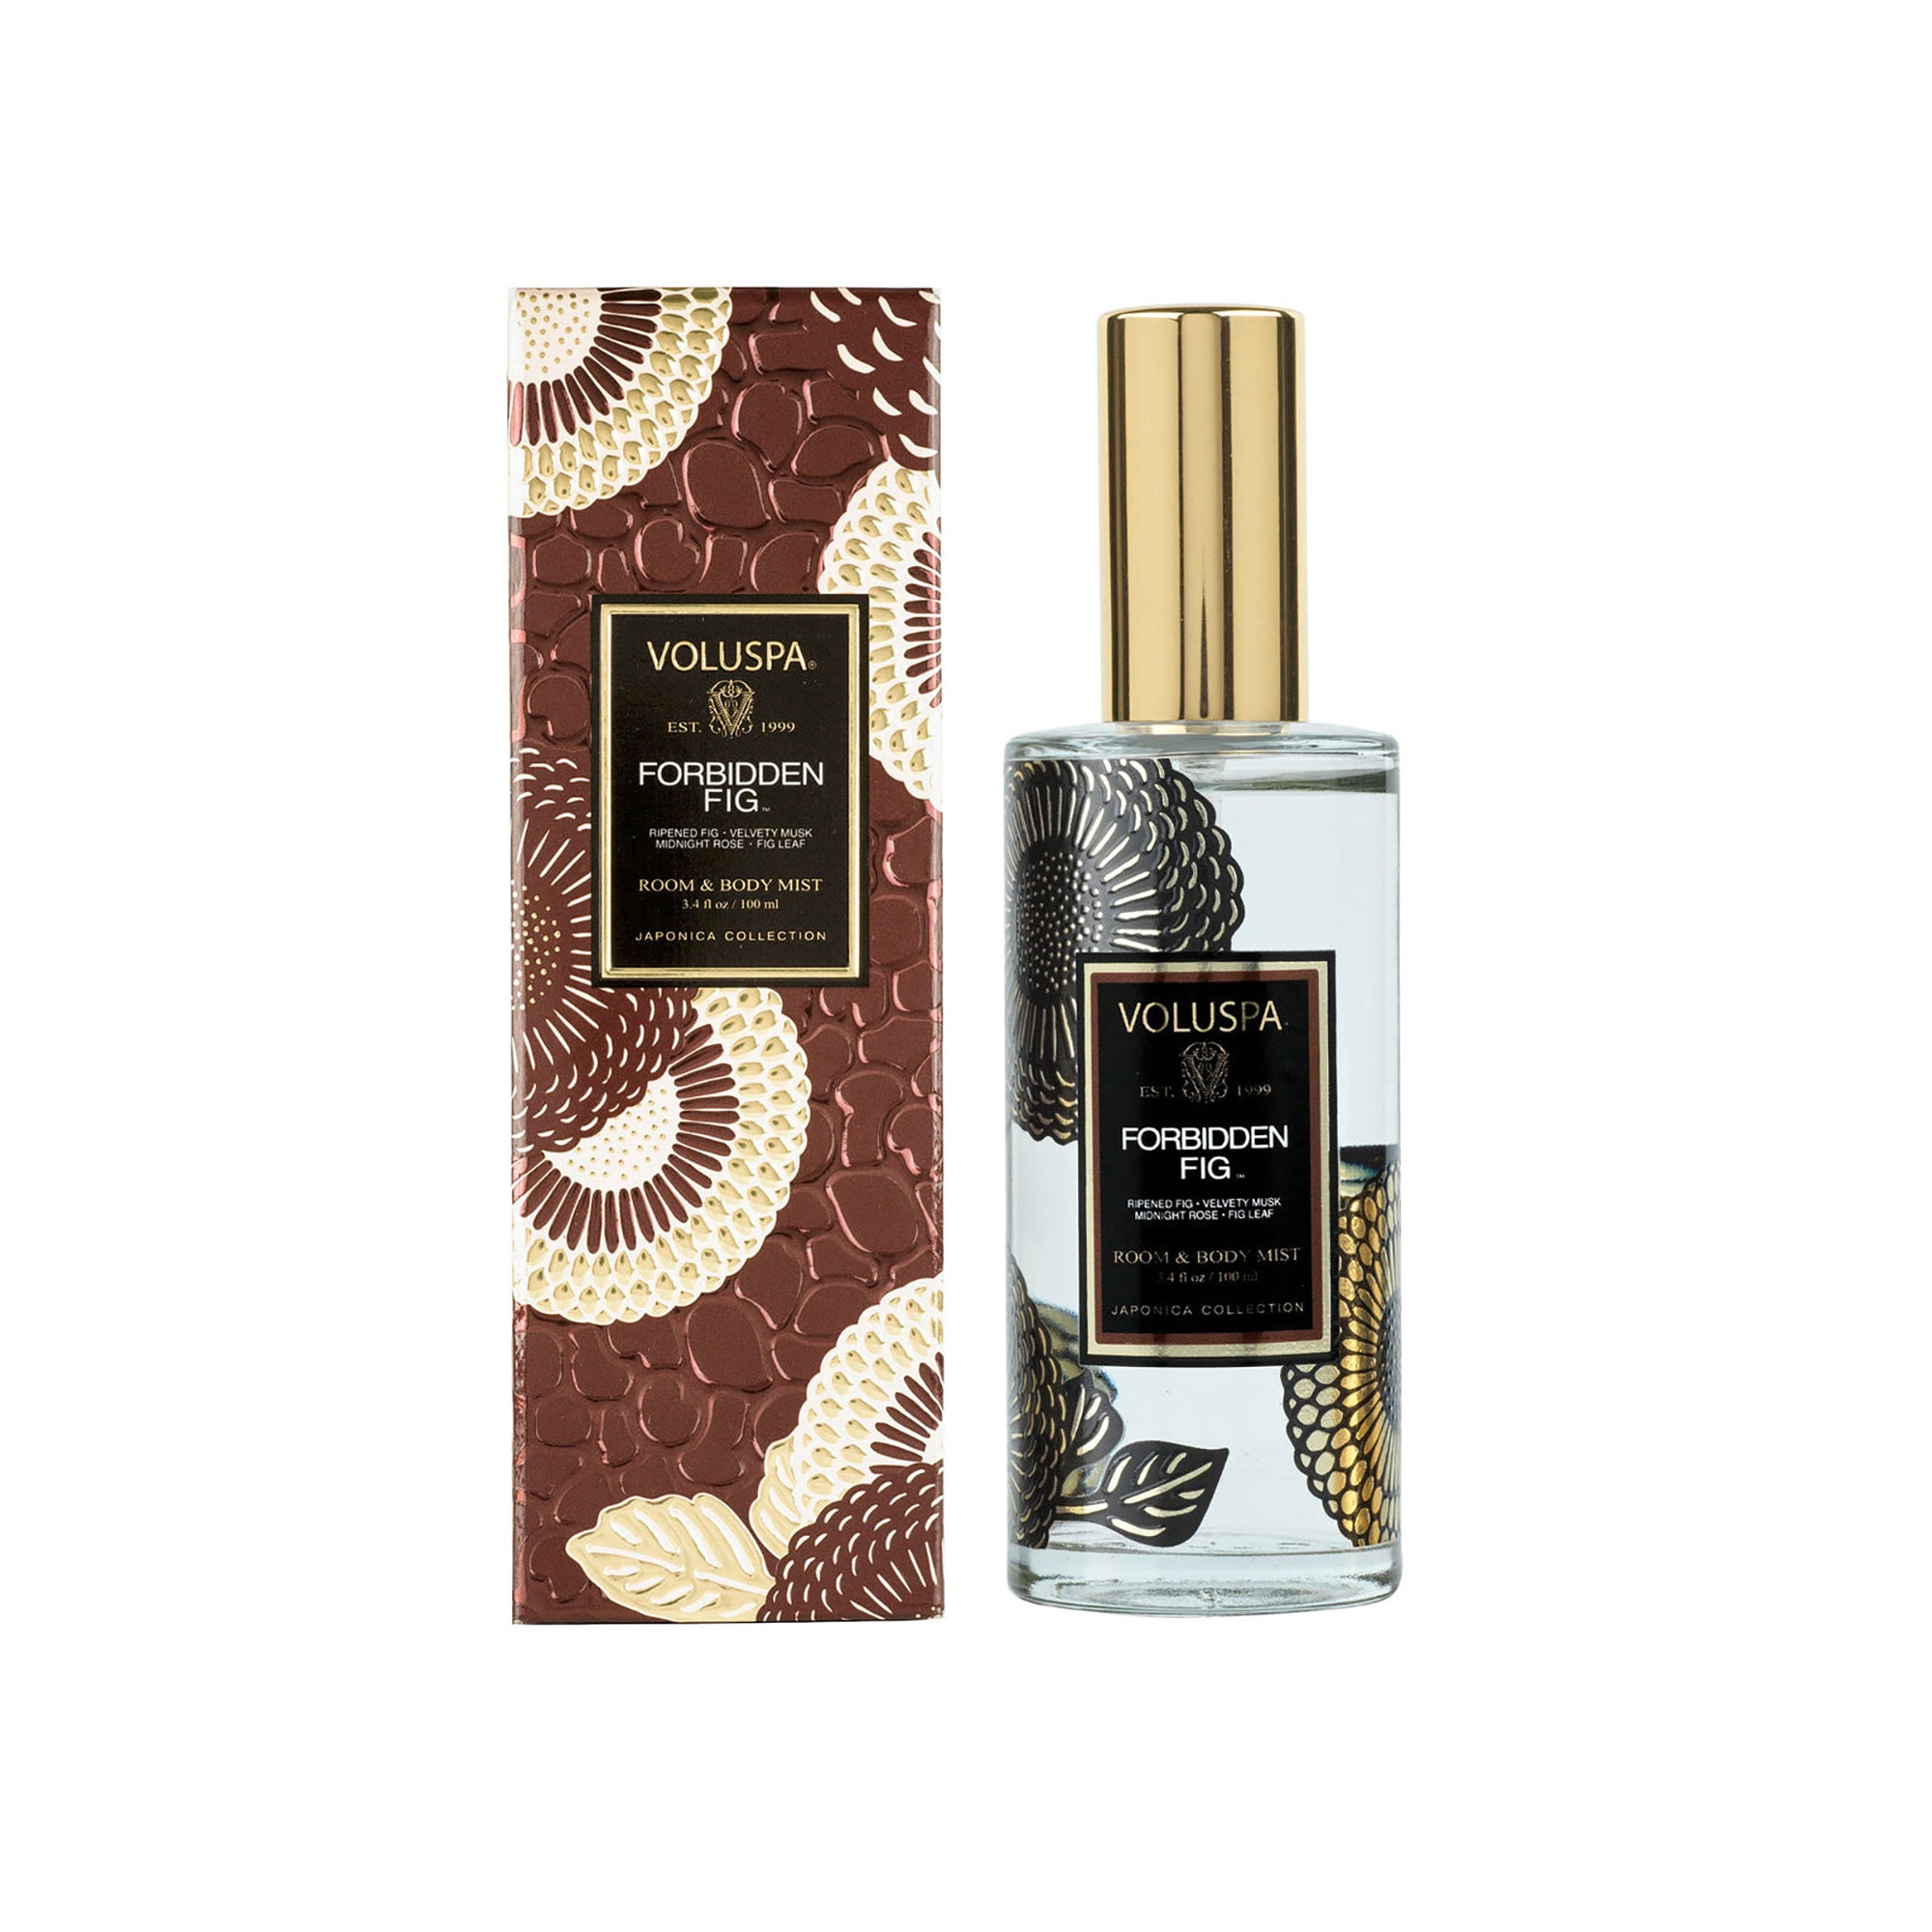 Voluspa Japonica Room and Body Mist / FORBIDDEN FIG